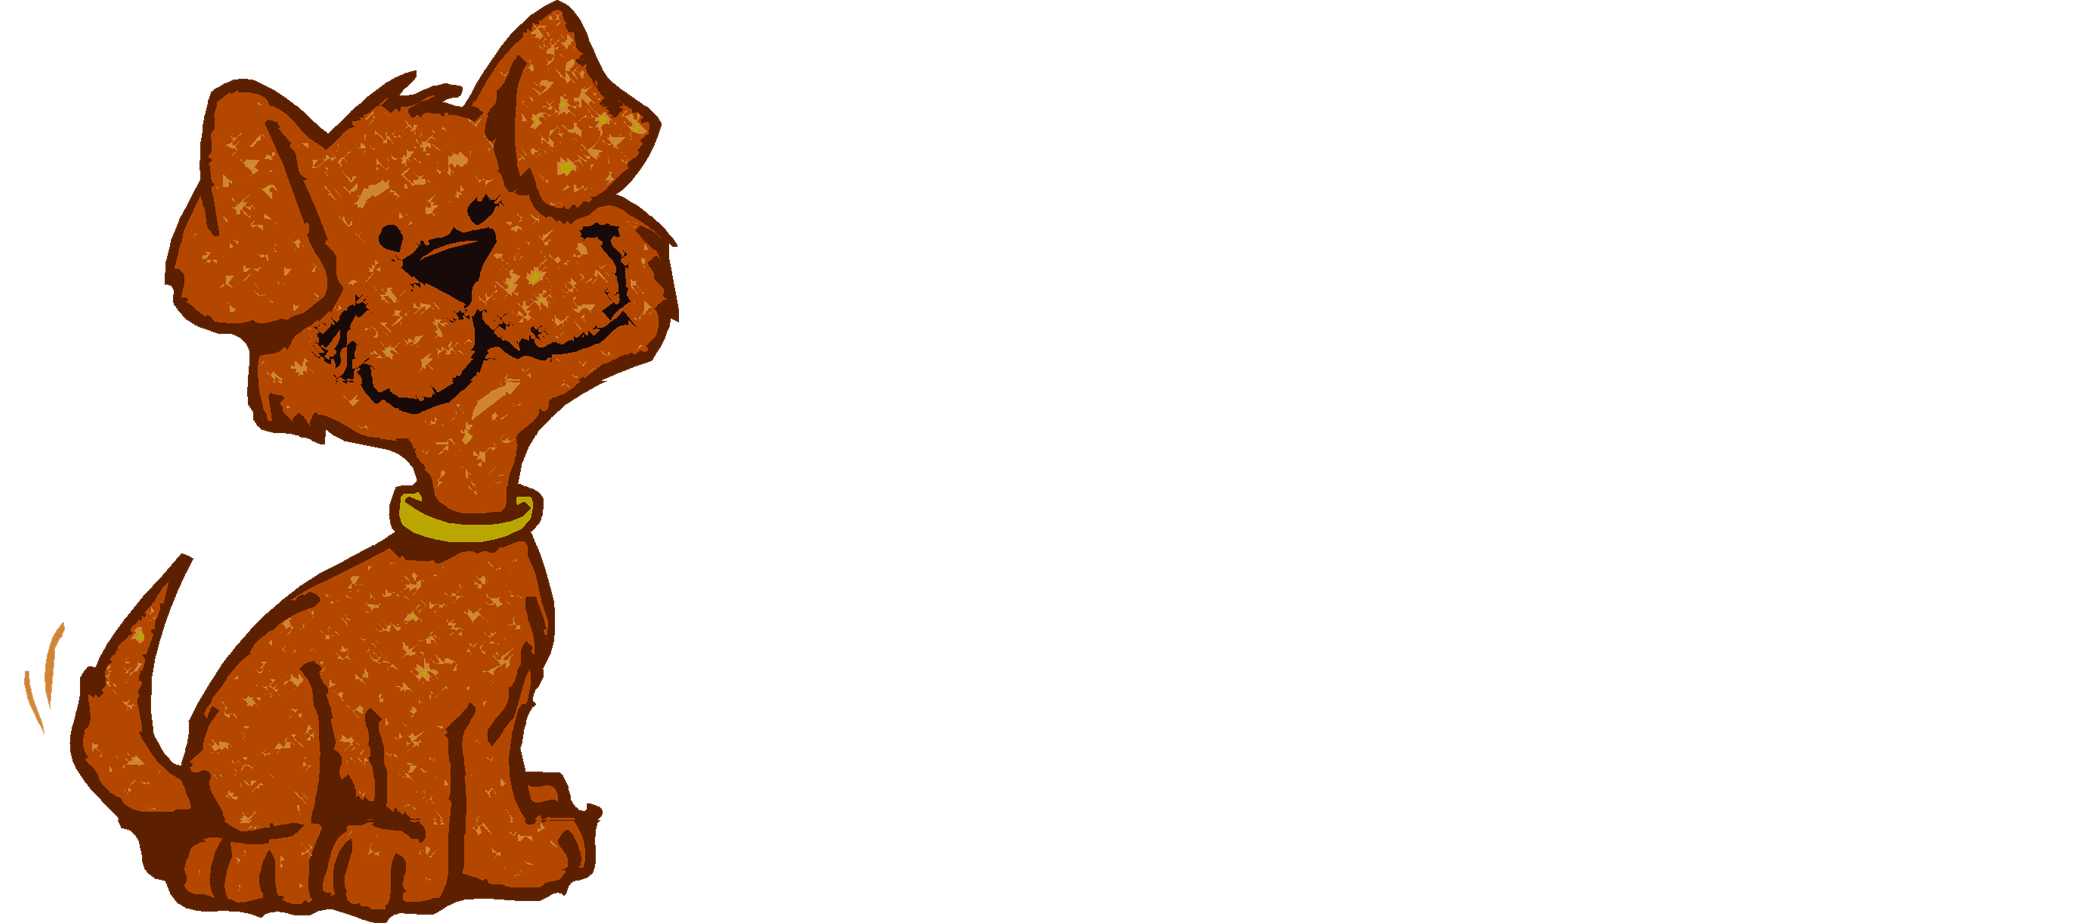 The Puppy Patch